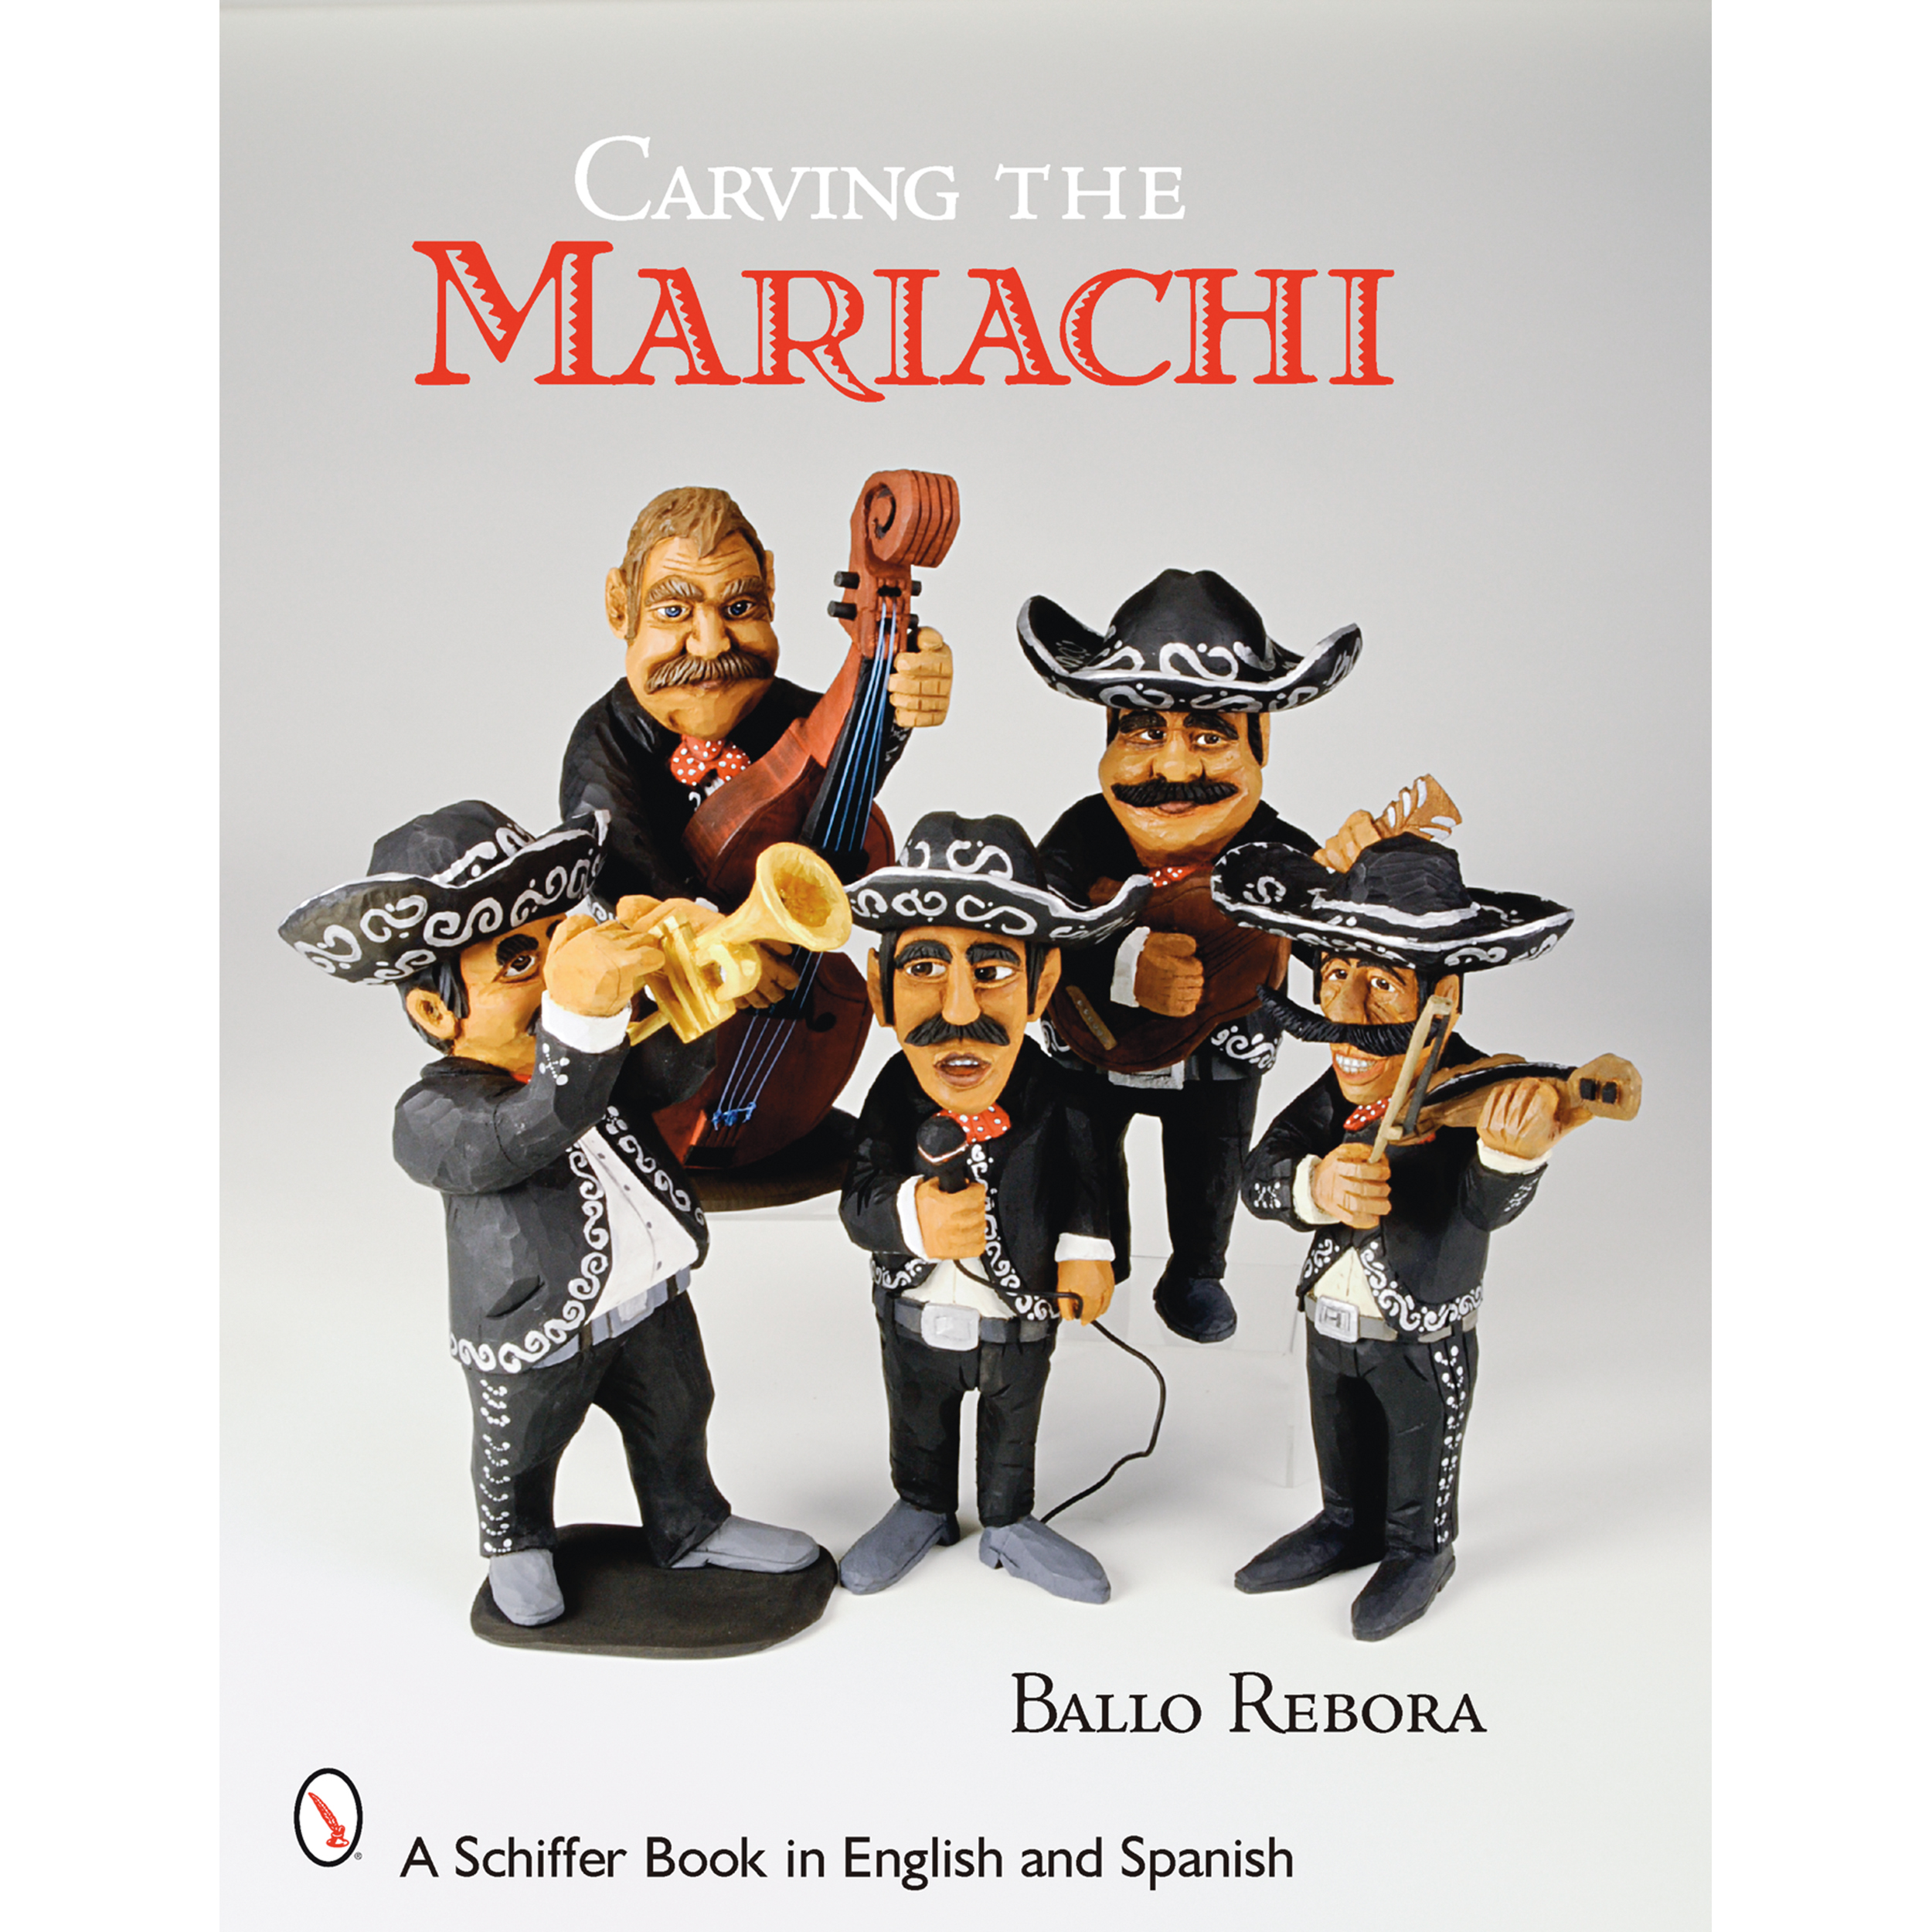 Carving The Mariachi